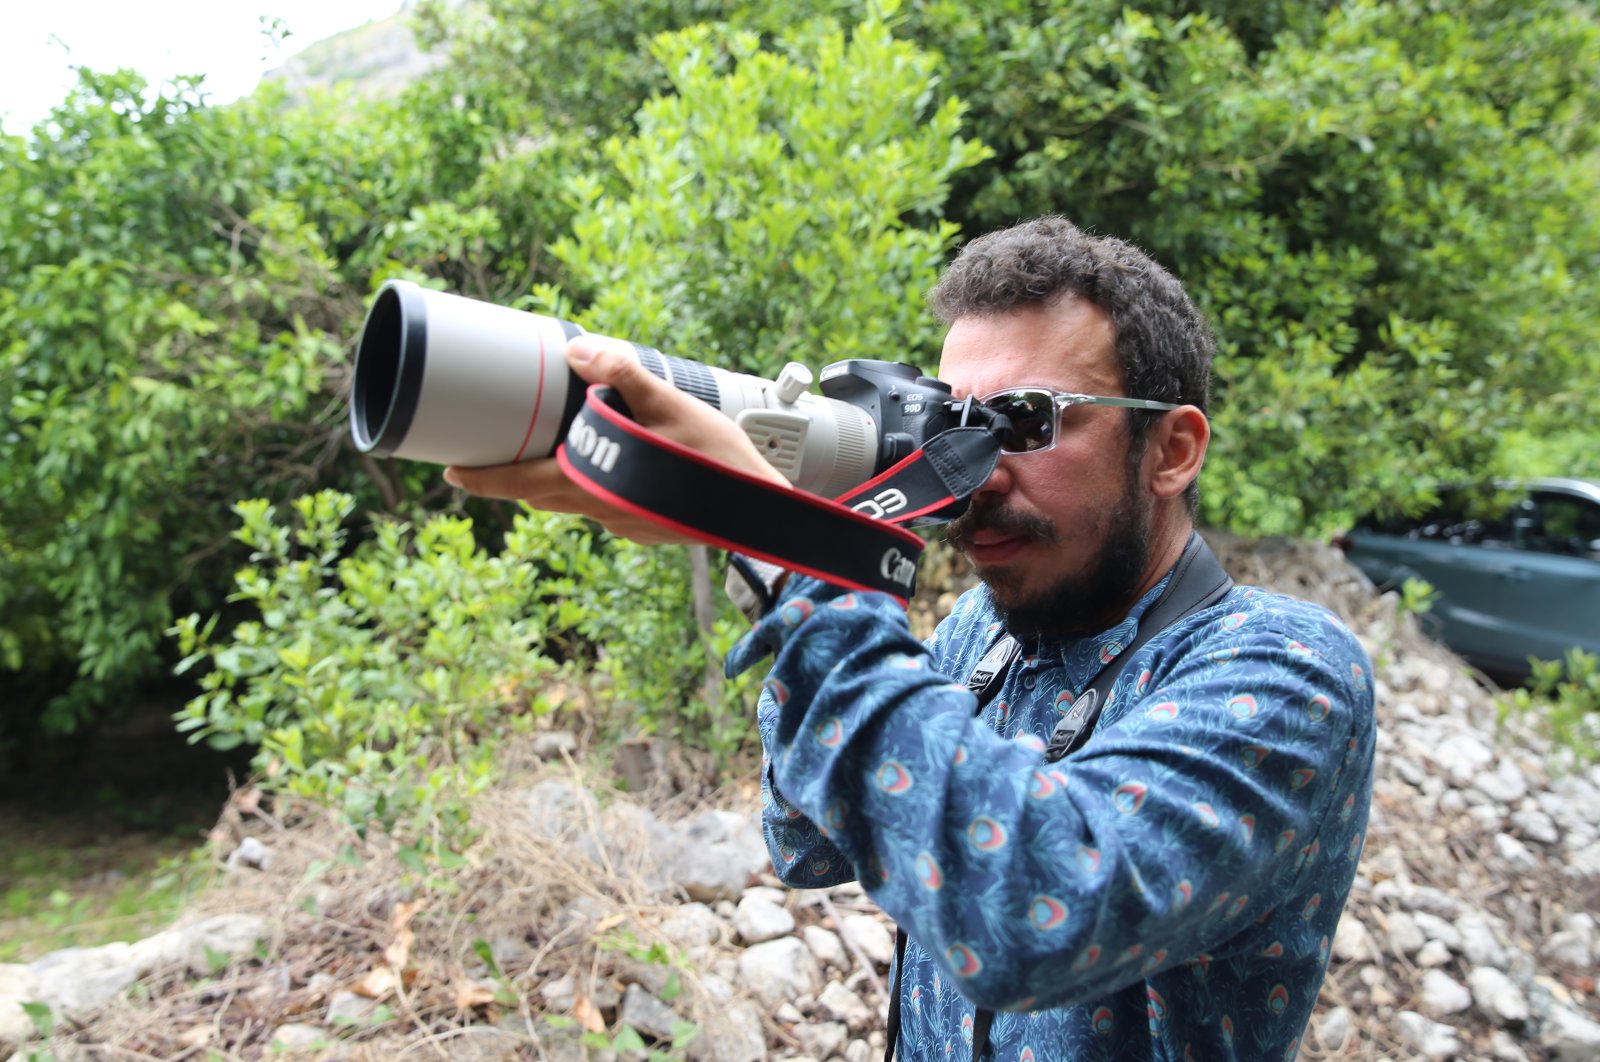 Emin Yoğurtcuoğlu, who started bird watching as a hobby at a young age and later continued professionally, added 14 new species to Turkey&#039;s bird inventory during his 23-year observation adventure. Yoğurtcuoğlu traveled every inch of Turkey, tracing new species, Hatay, Turkey, May 21, 2022. (AA Photo)